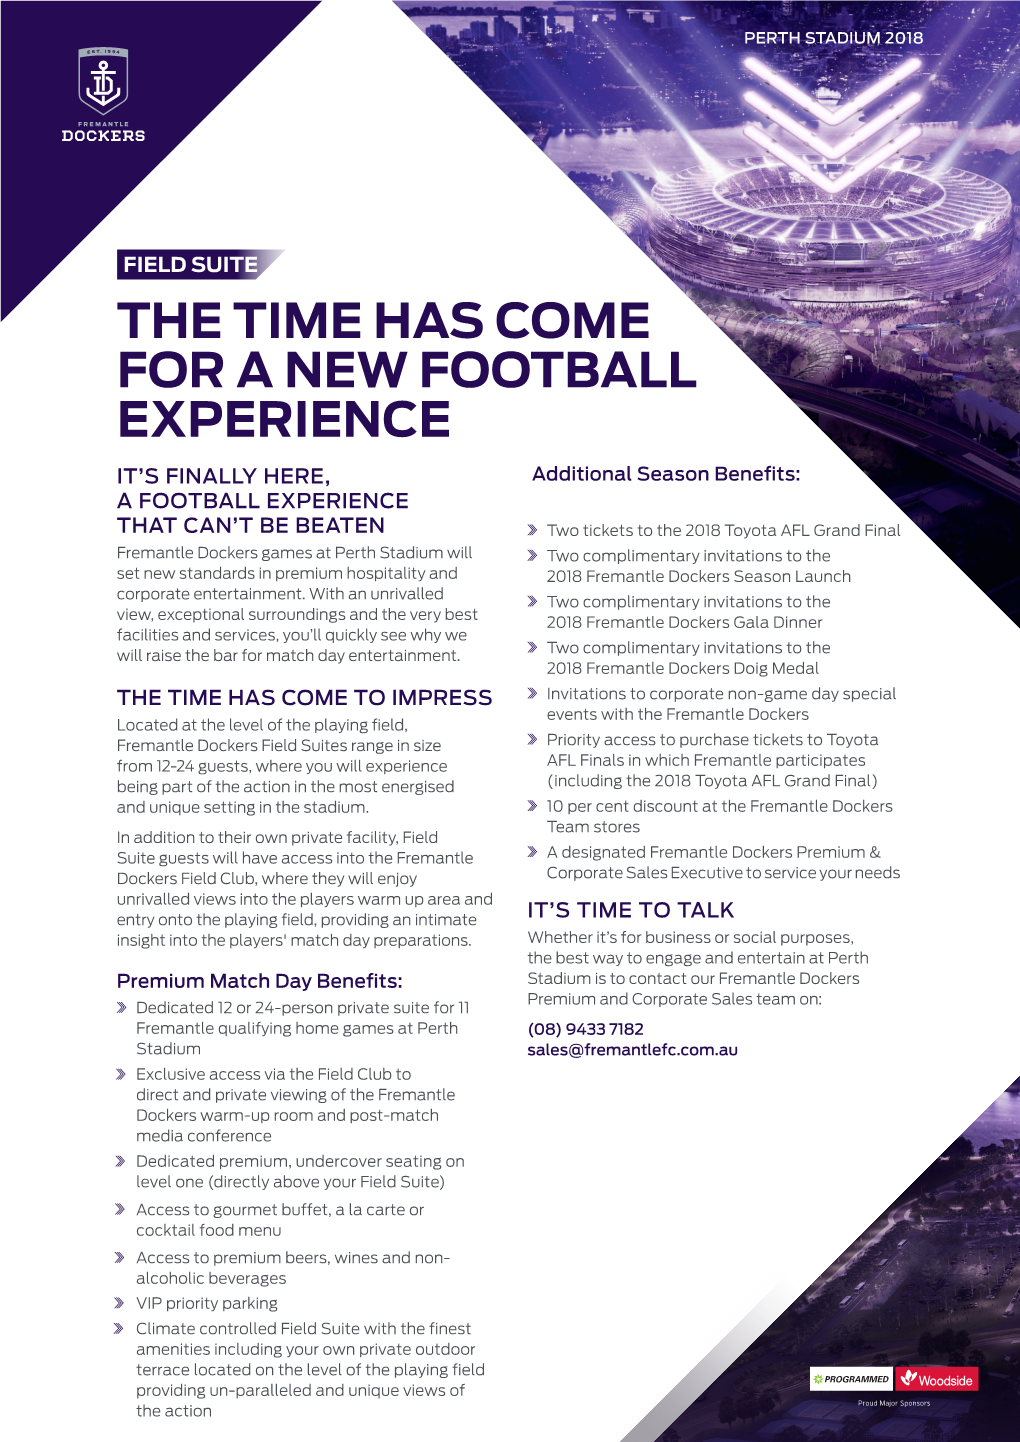 The Time Has Come for a New Football Experience